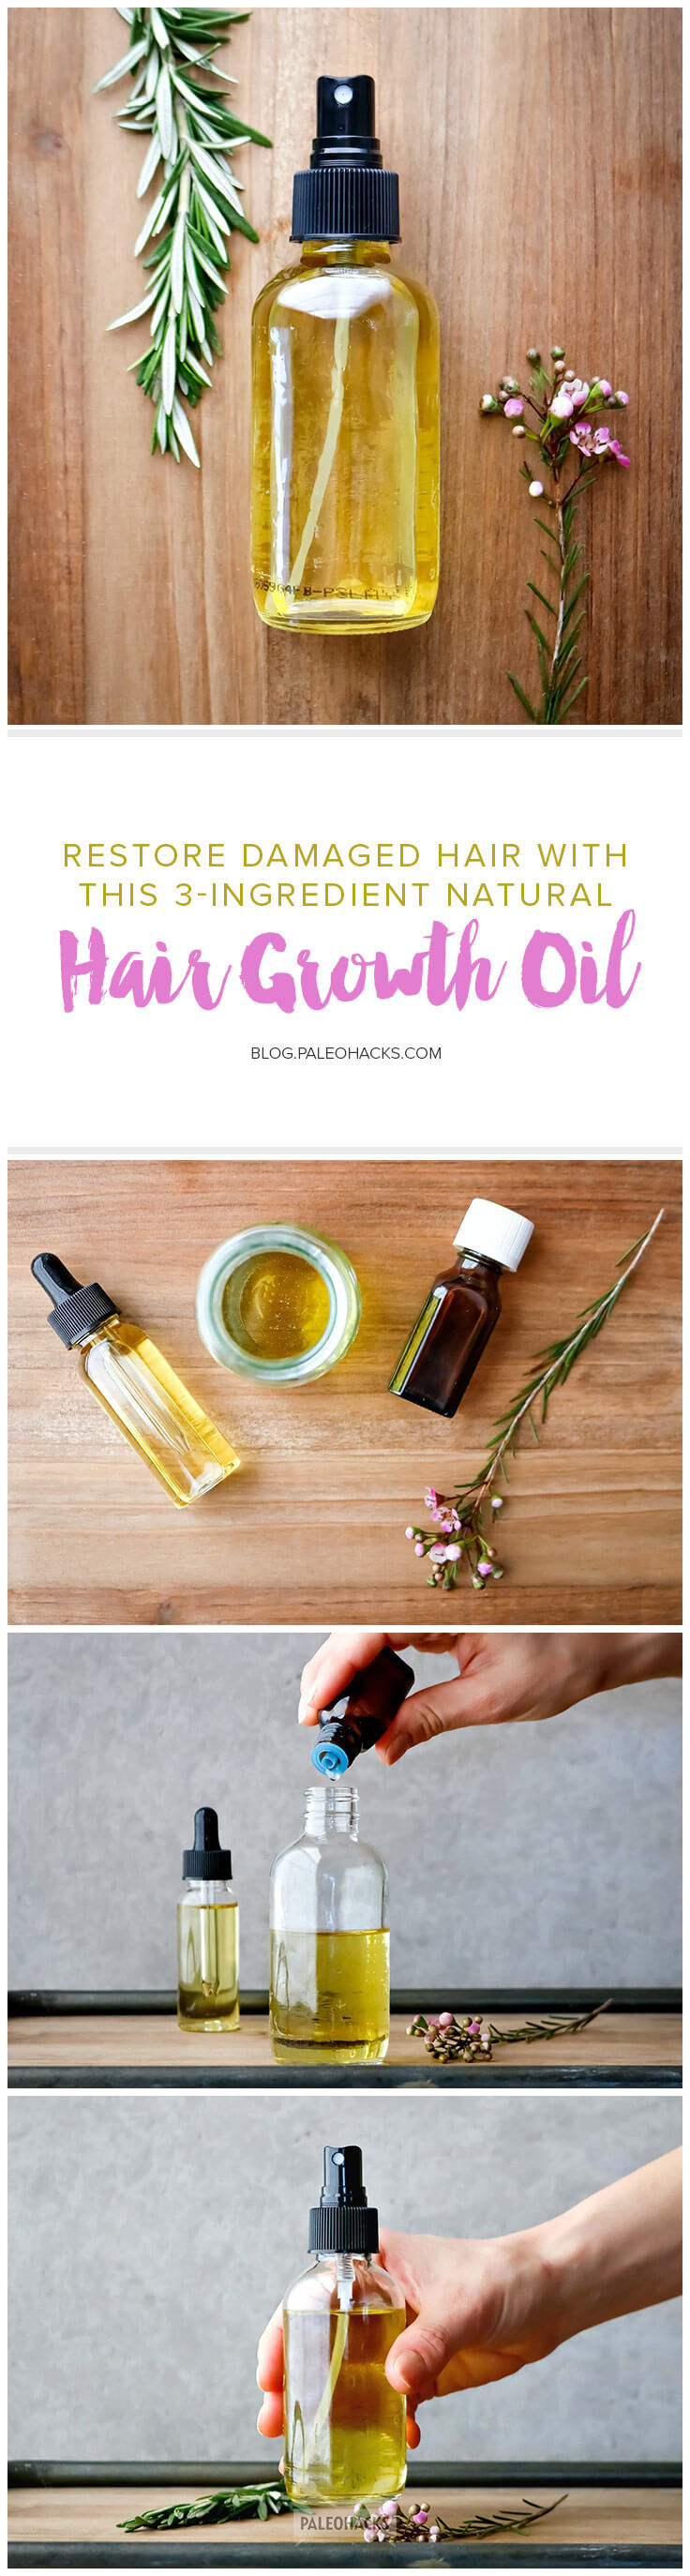 Revitalize your hair naturally with this 3-ingredient Hair Growth Oil you can use for healthy tresses.